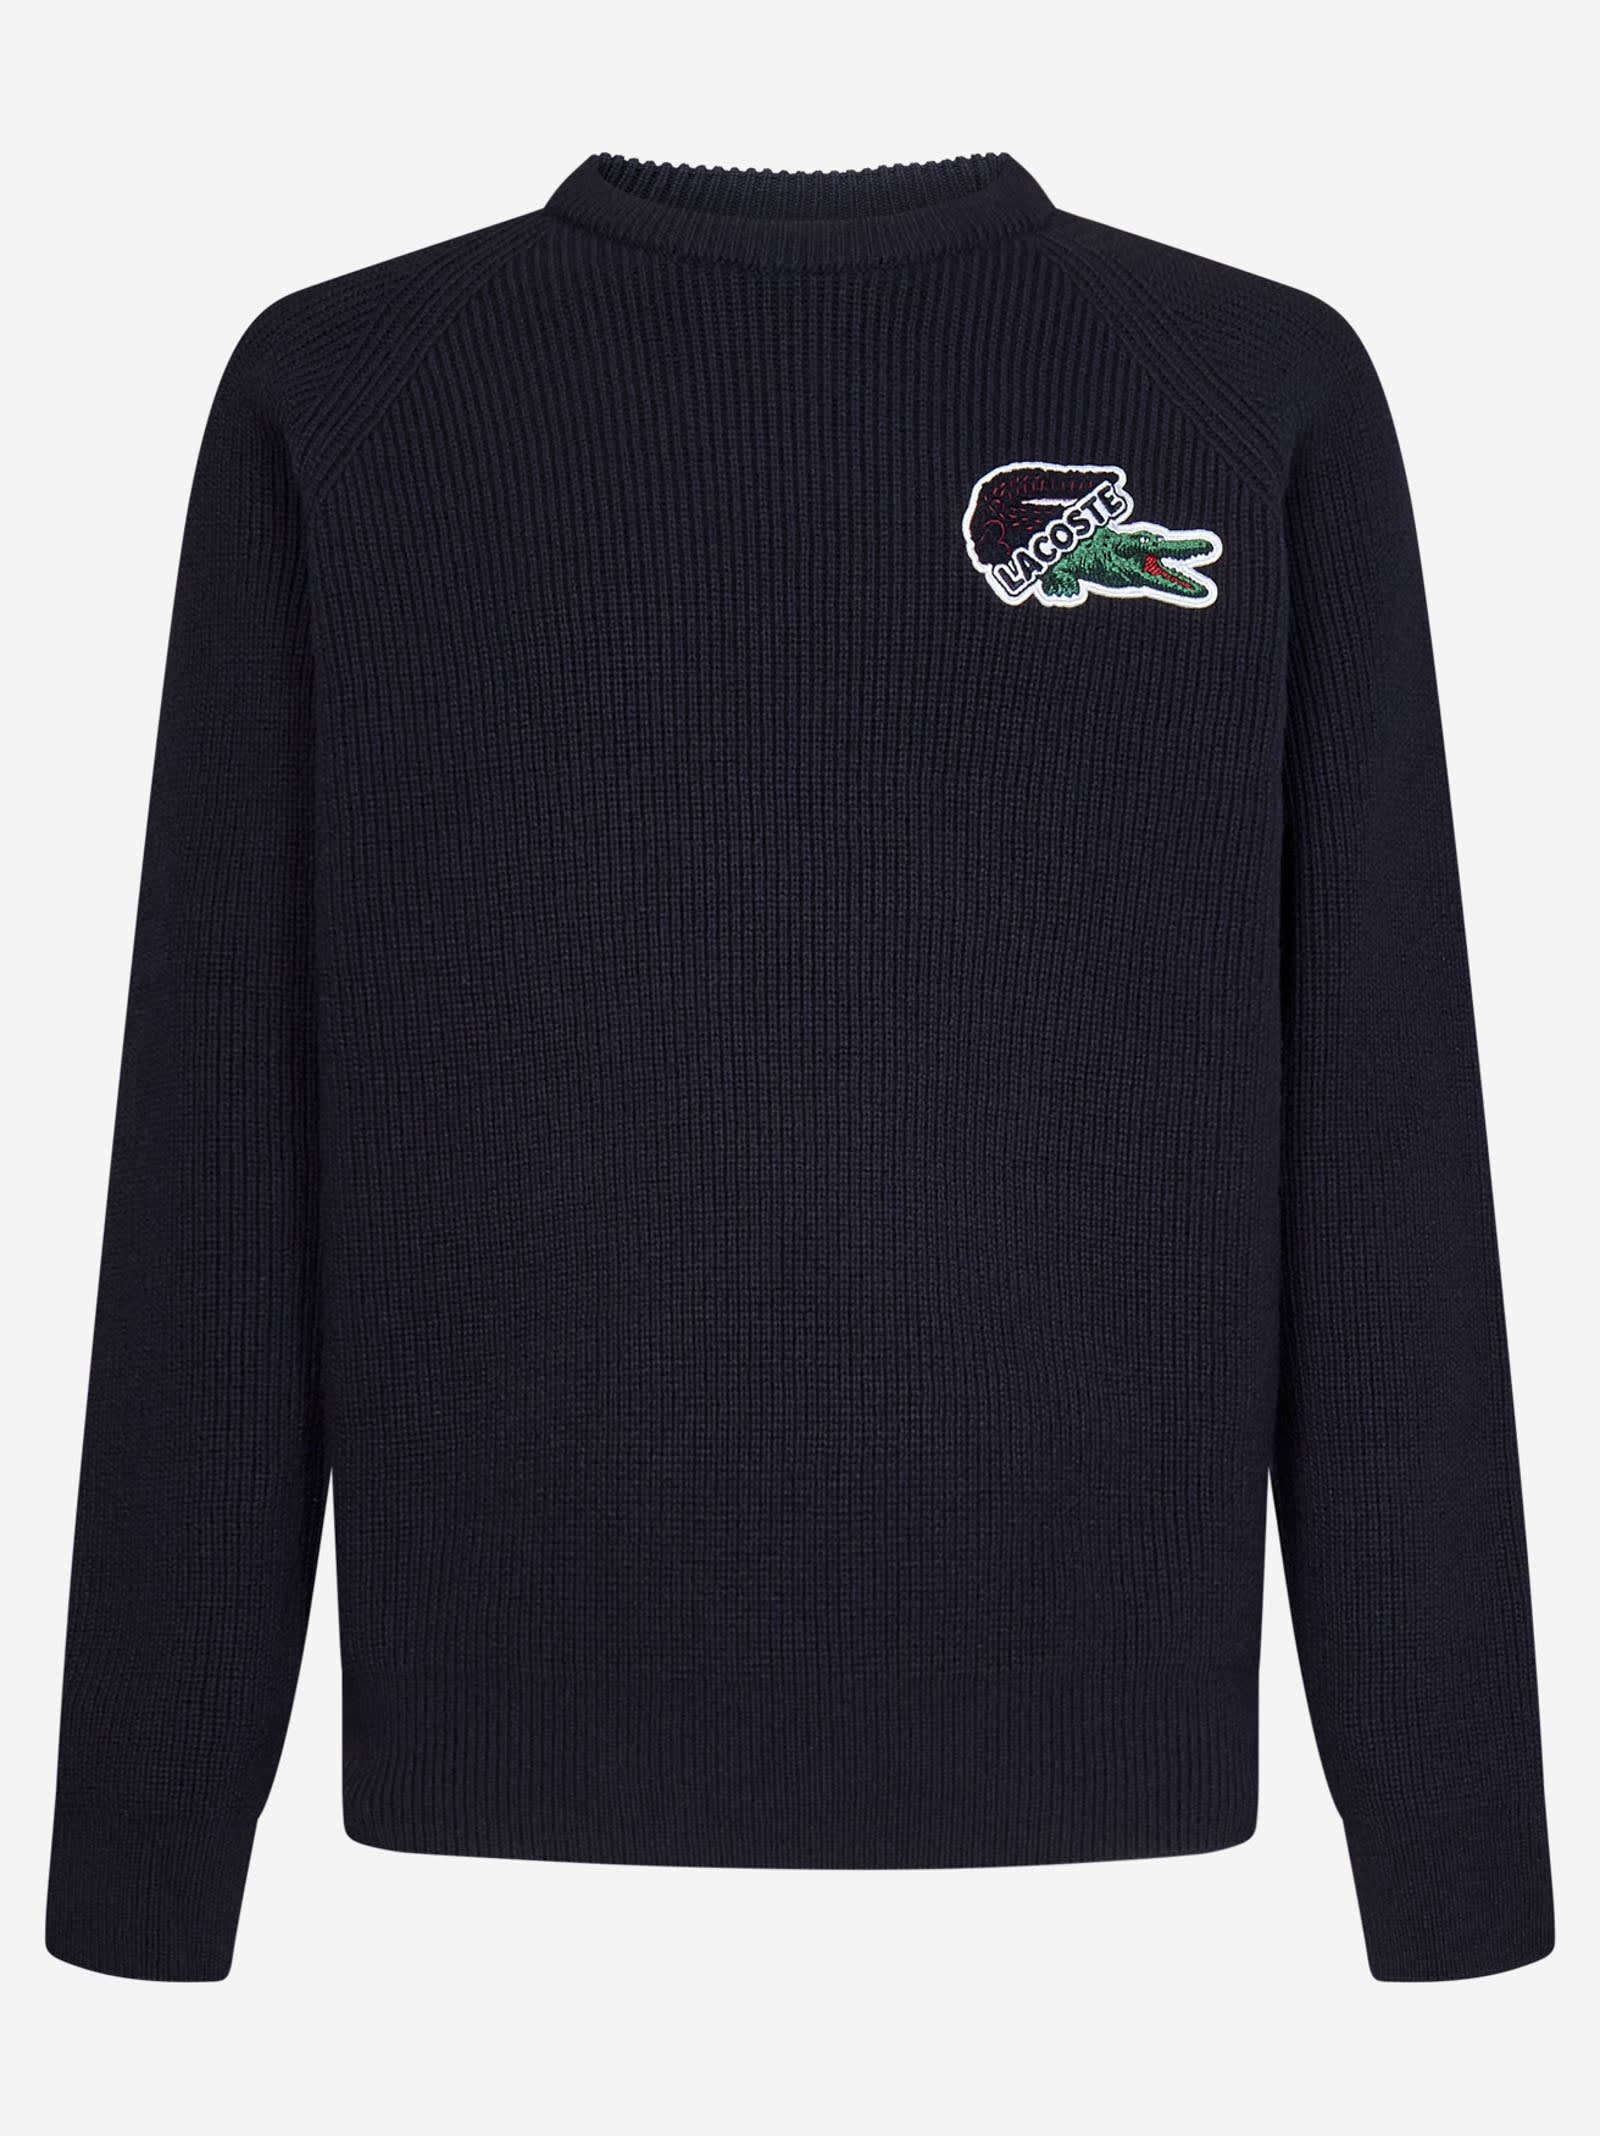 Lacoste Holiday Sweater